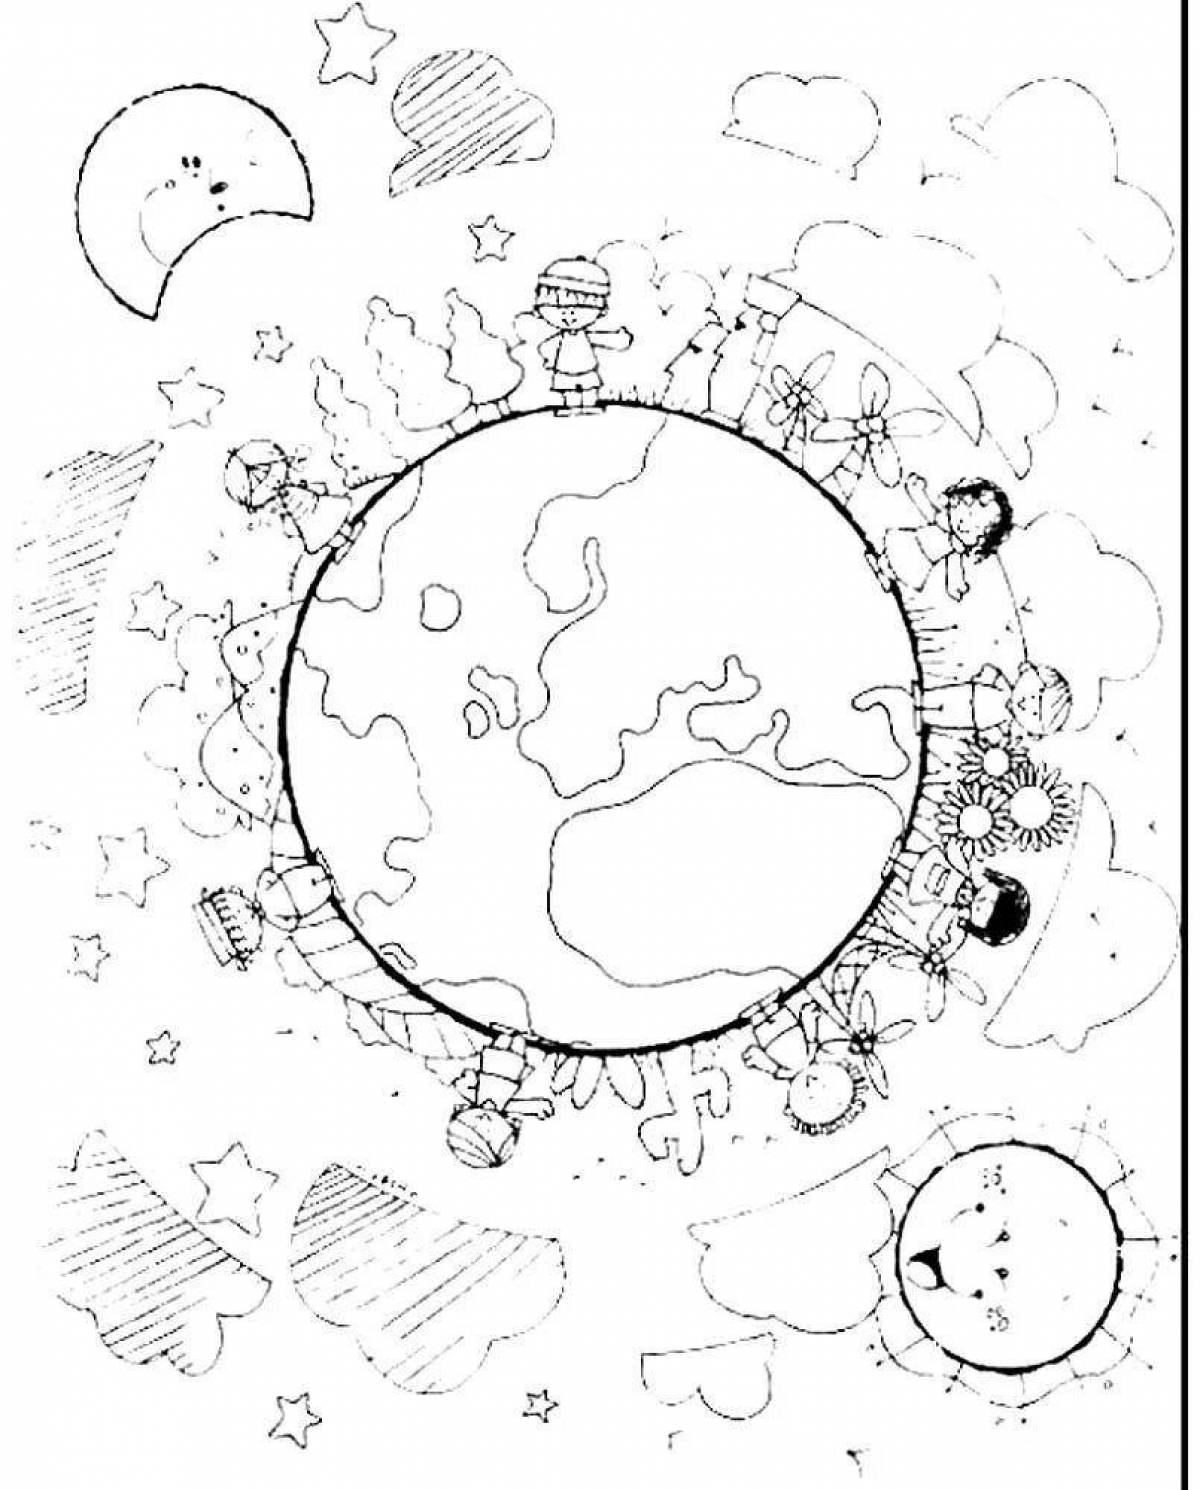 Coloring page blissful peace on earth